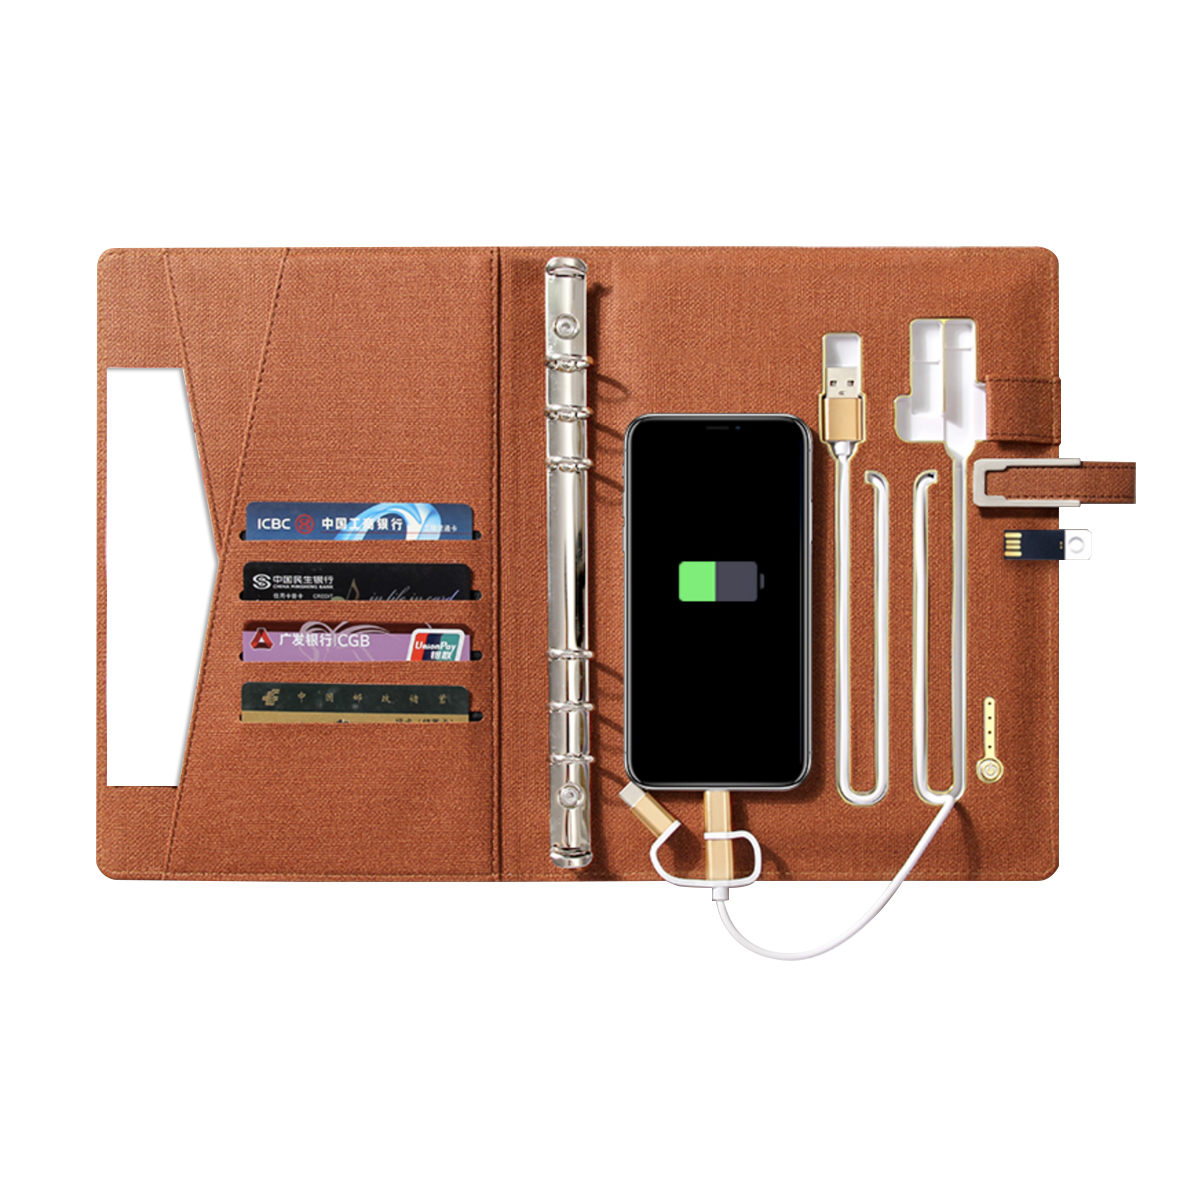 6-Ring Organizer with Power Bank